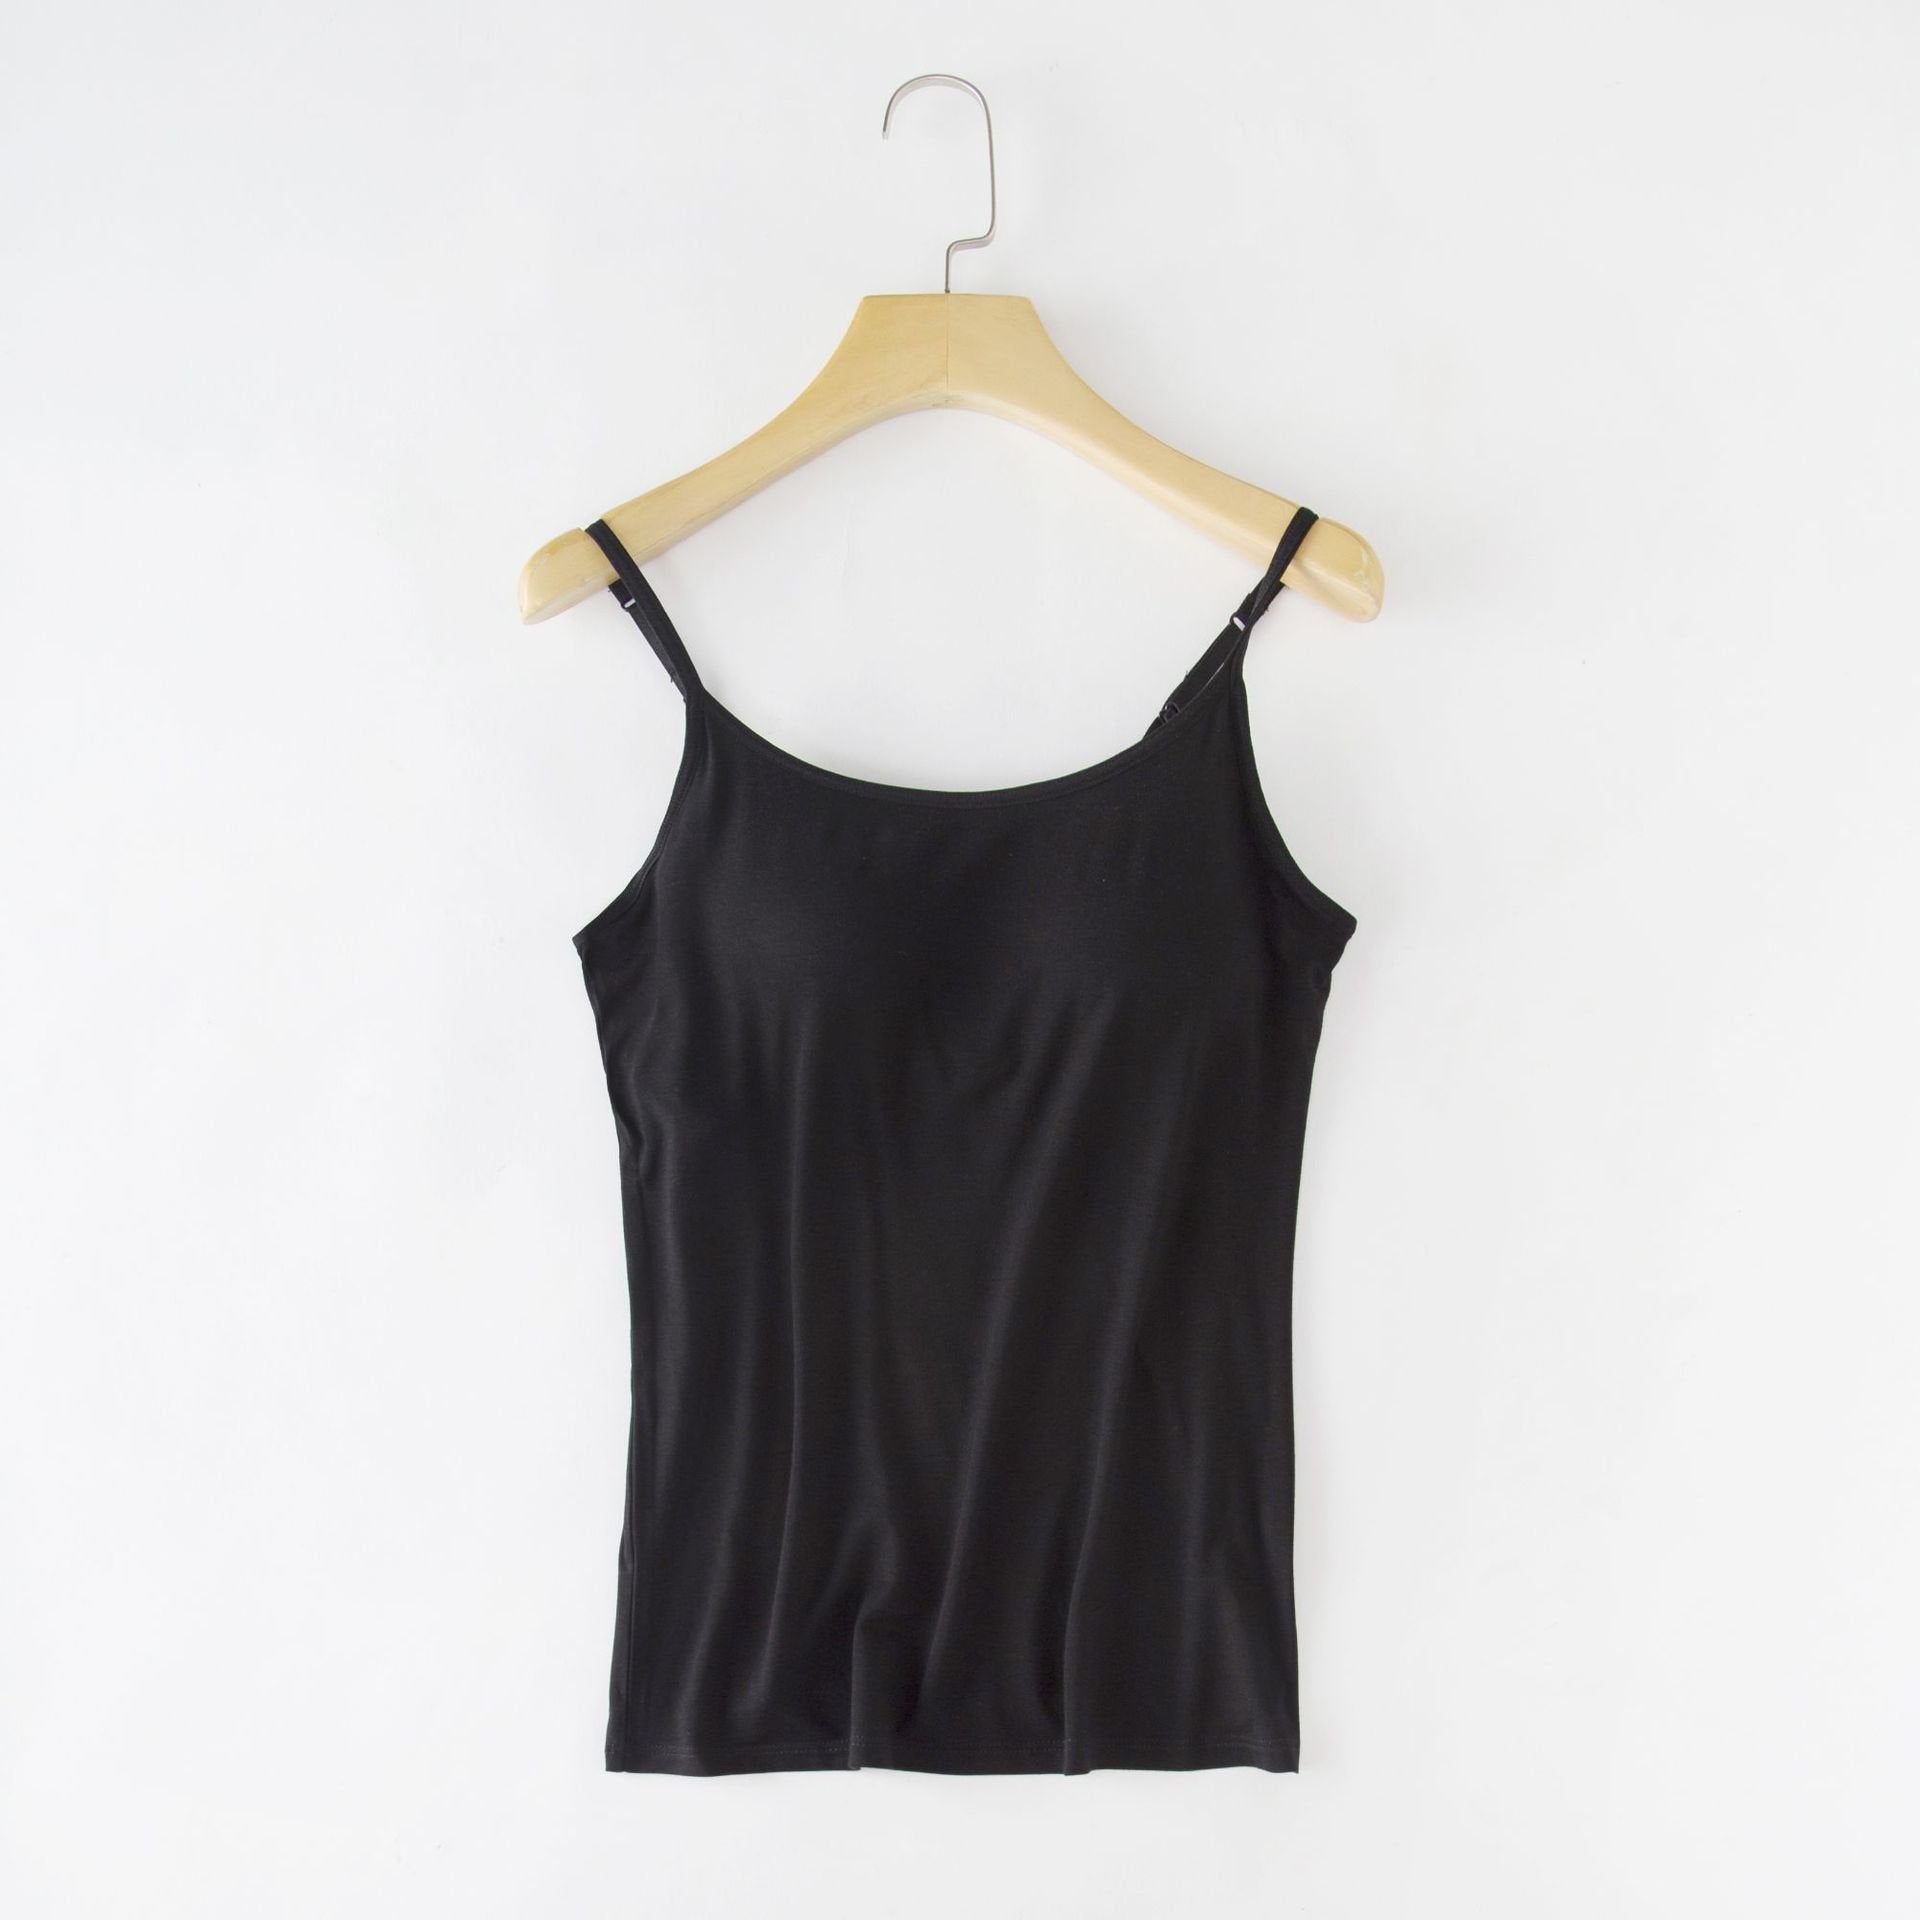 🔥Last Day 50% Off - Tank With Built-In Bra